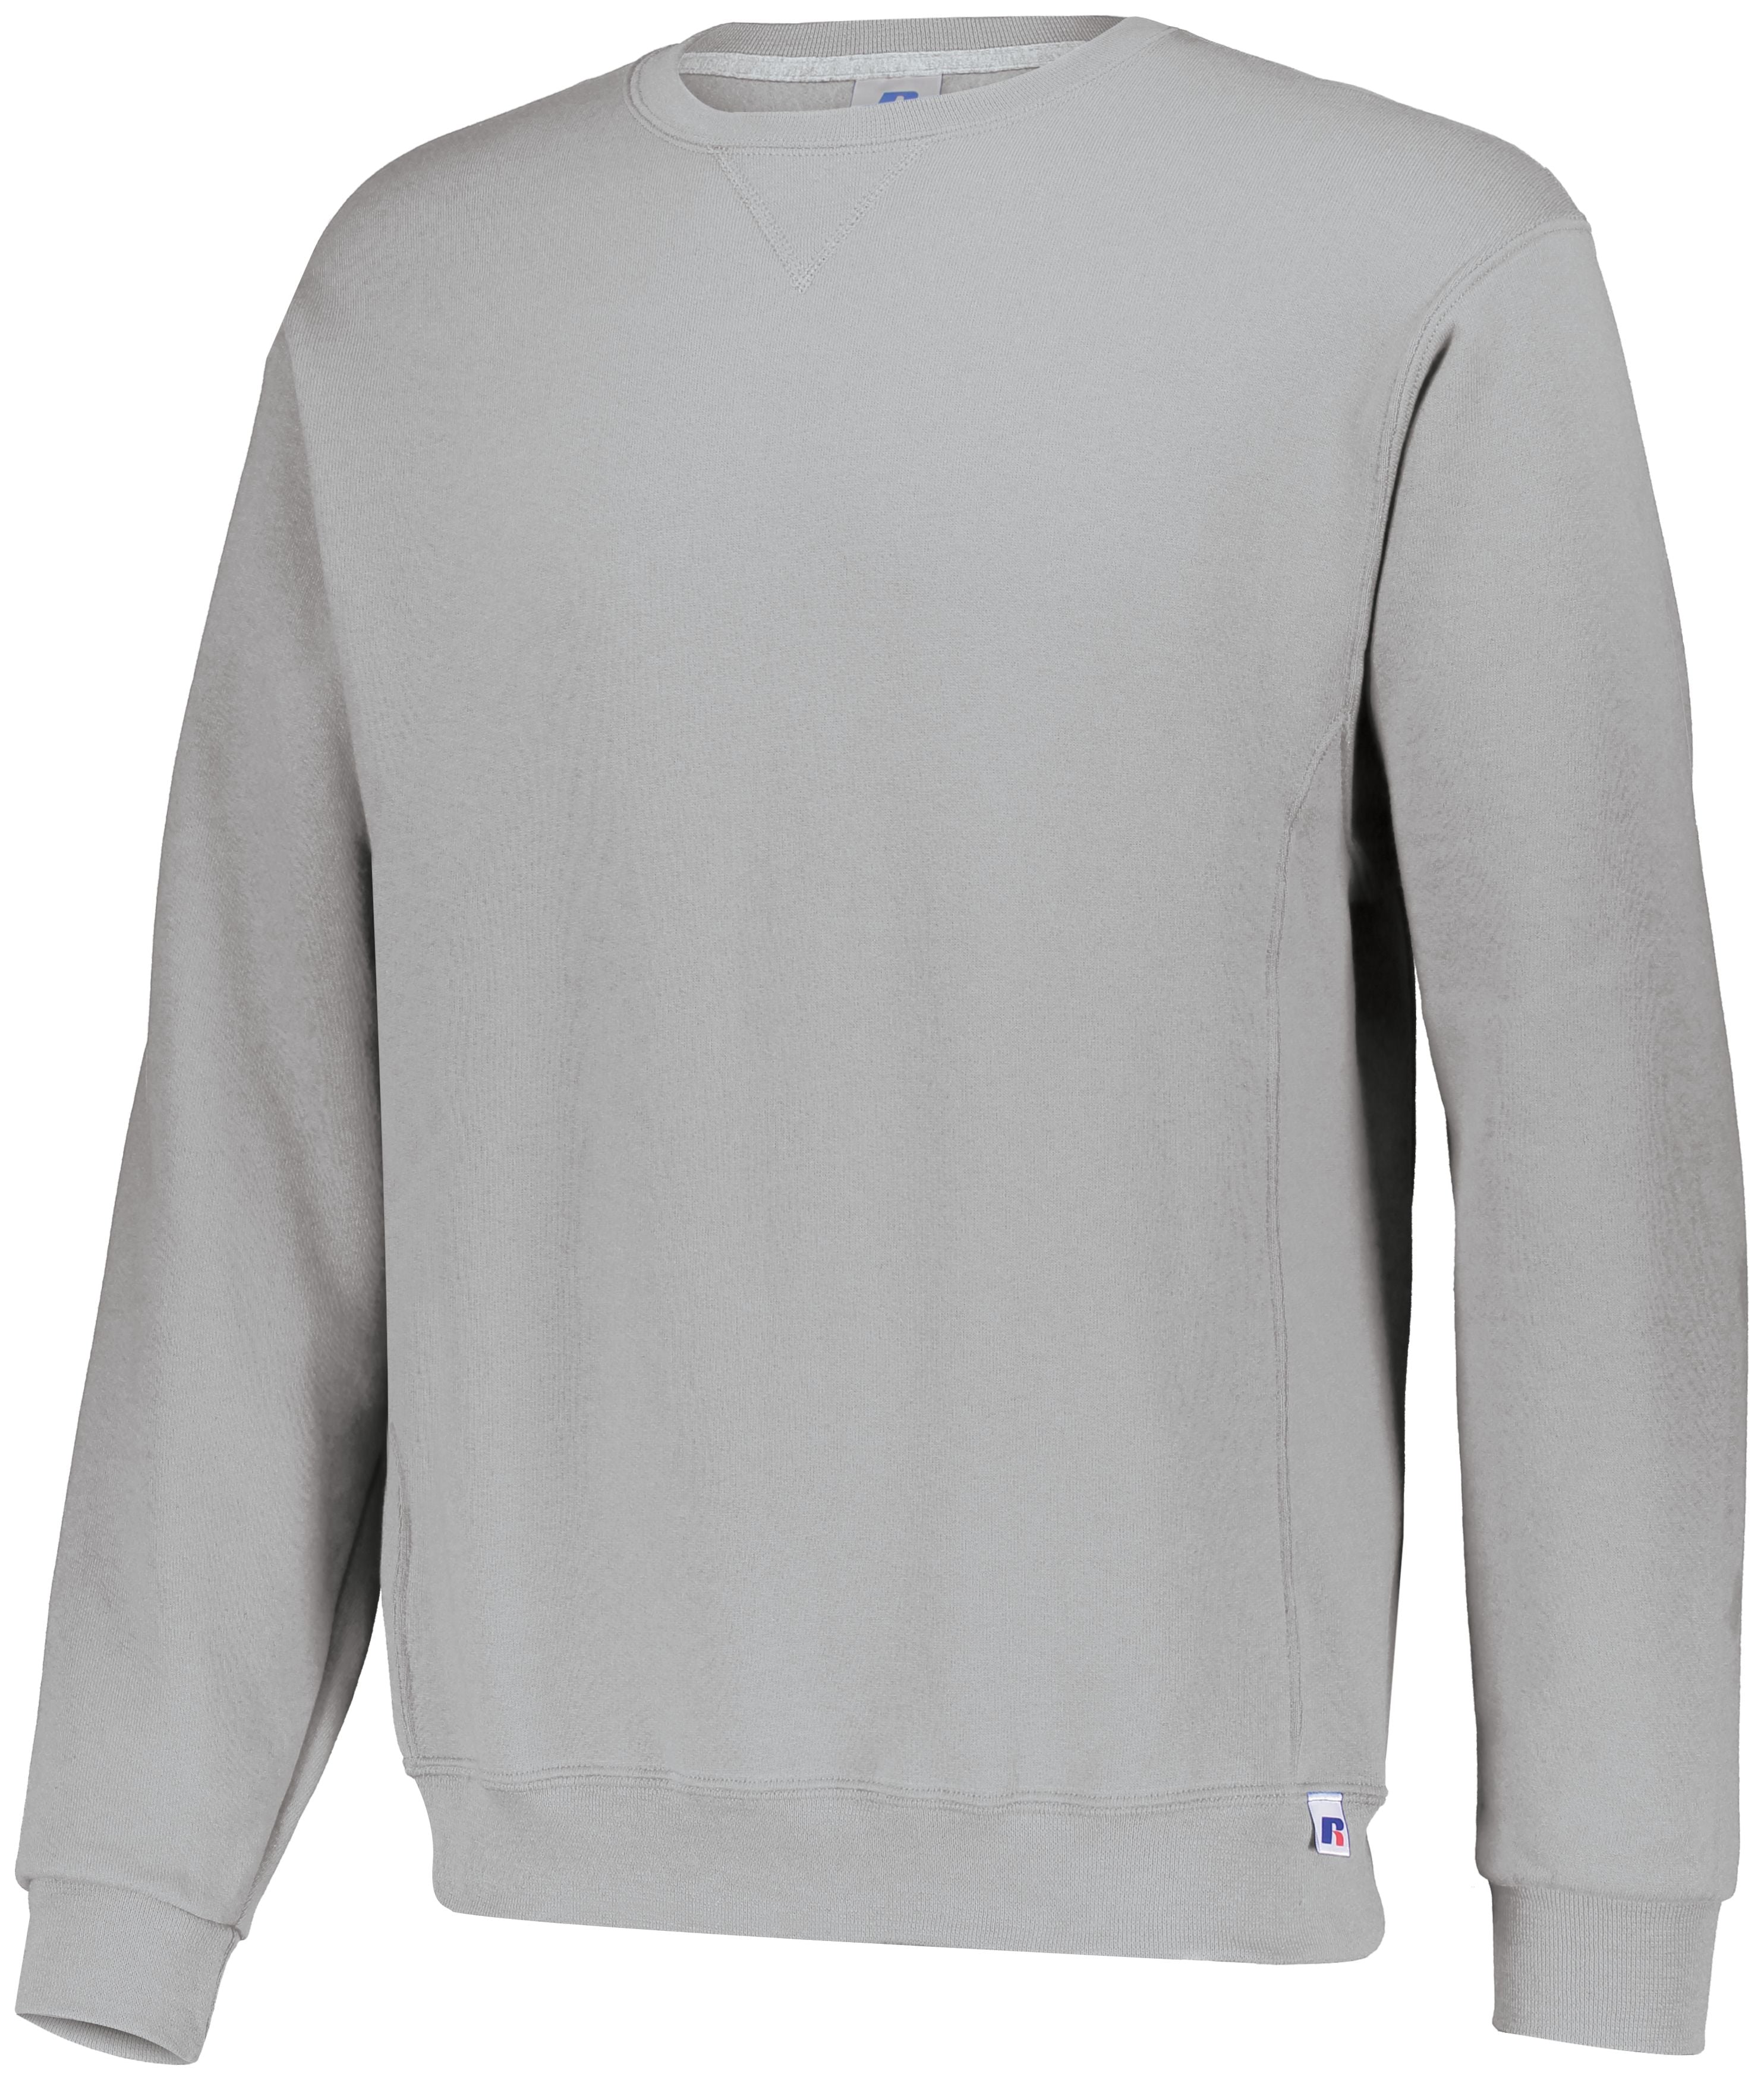 Russell Athletic Youth Dri-Power Fleece Crew Sweatshirt in Oxford  -Part of the Youth, Youth-Sweatshirt, Russell-Athletic-Products, Outerwear product lines at KanaleyCreations.com